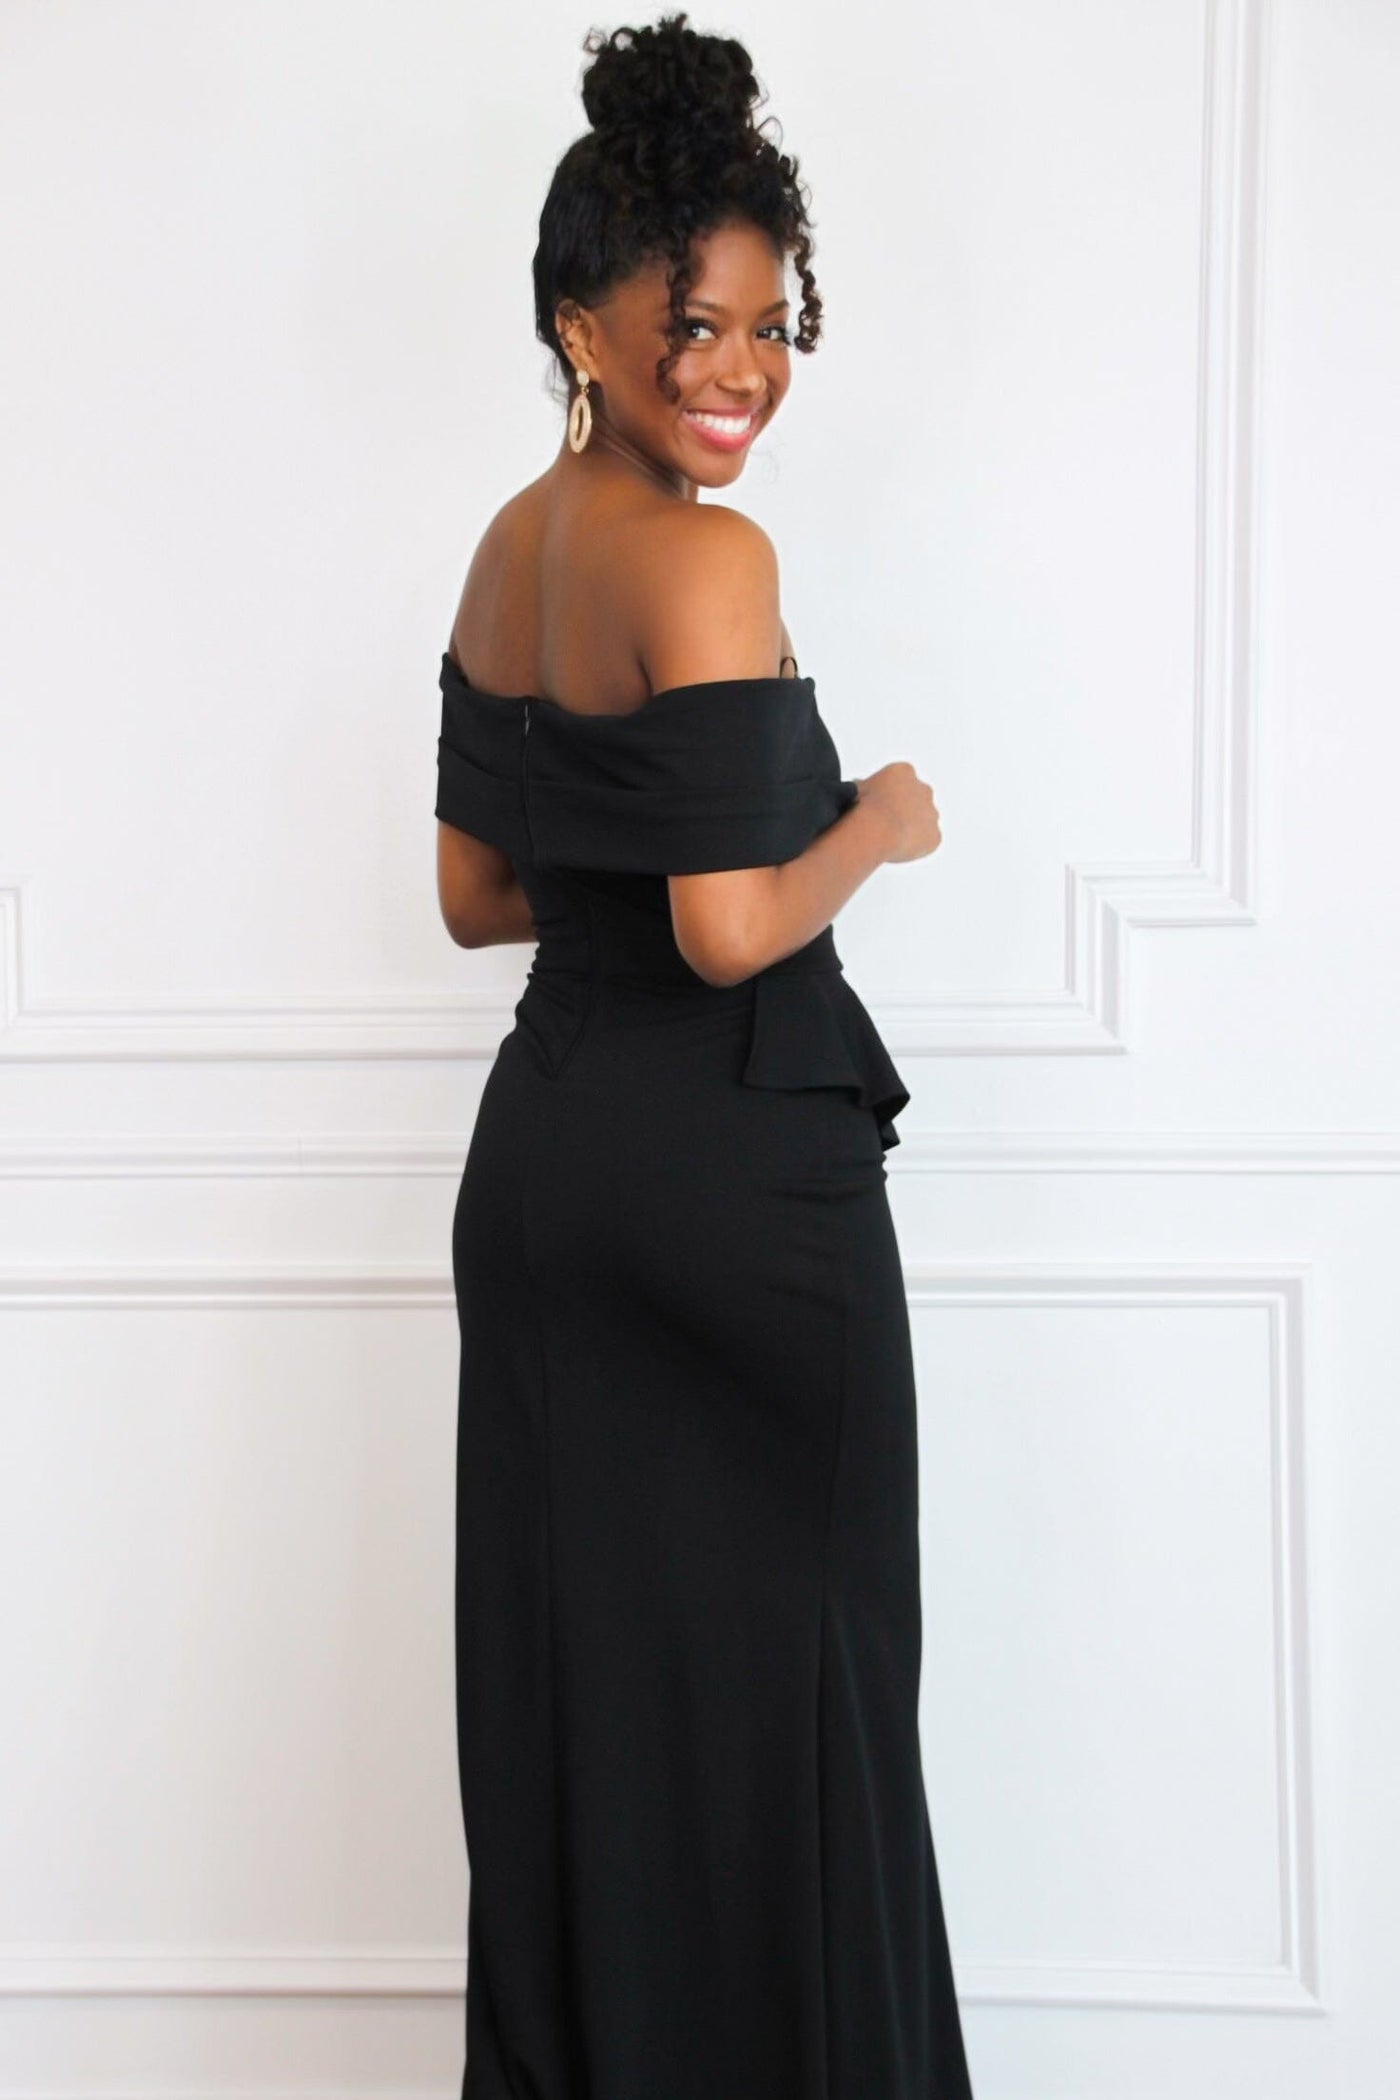 Reese Ruffle Off Shoulder Maxi Dress: Black - Bella and Bloom Boutique